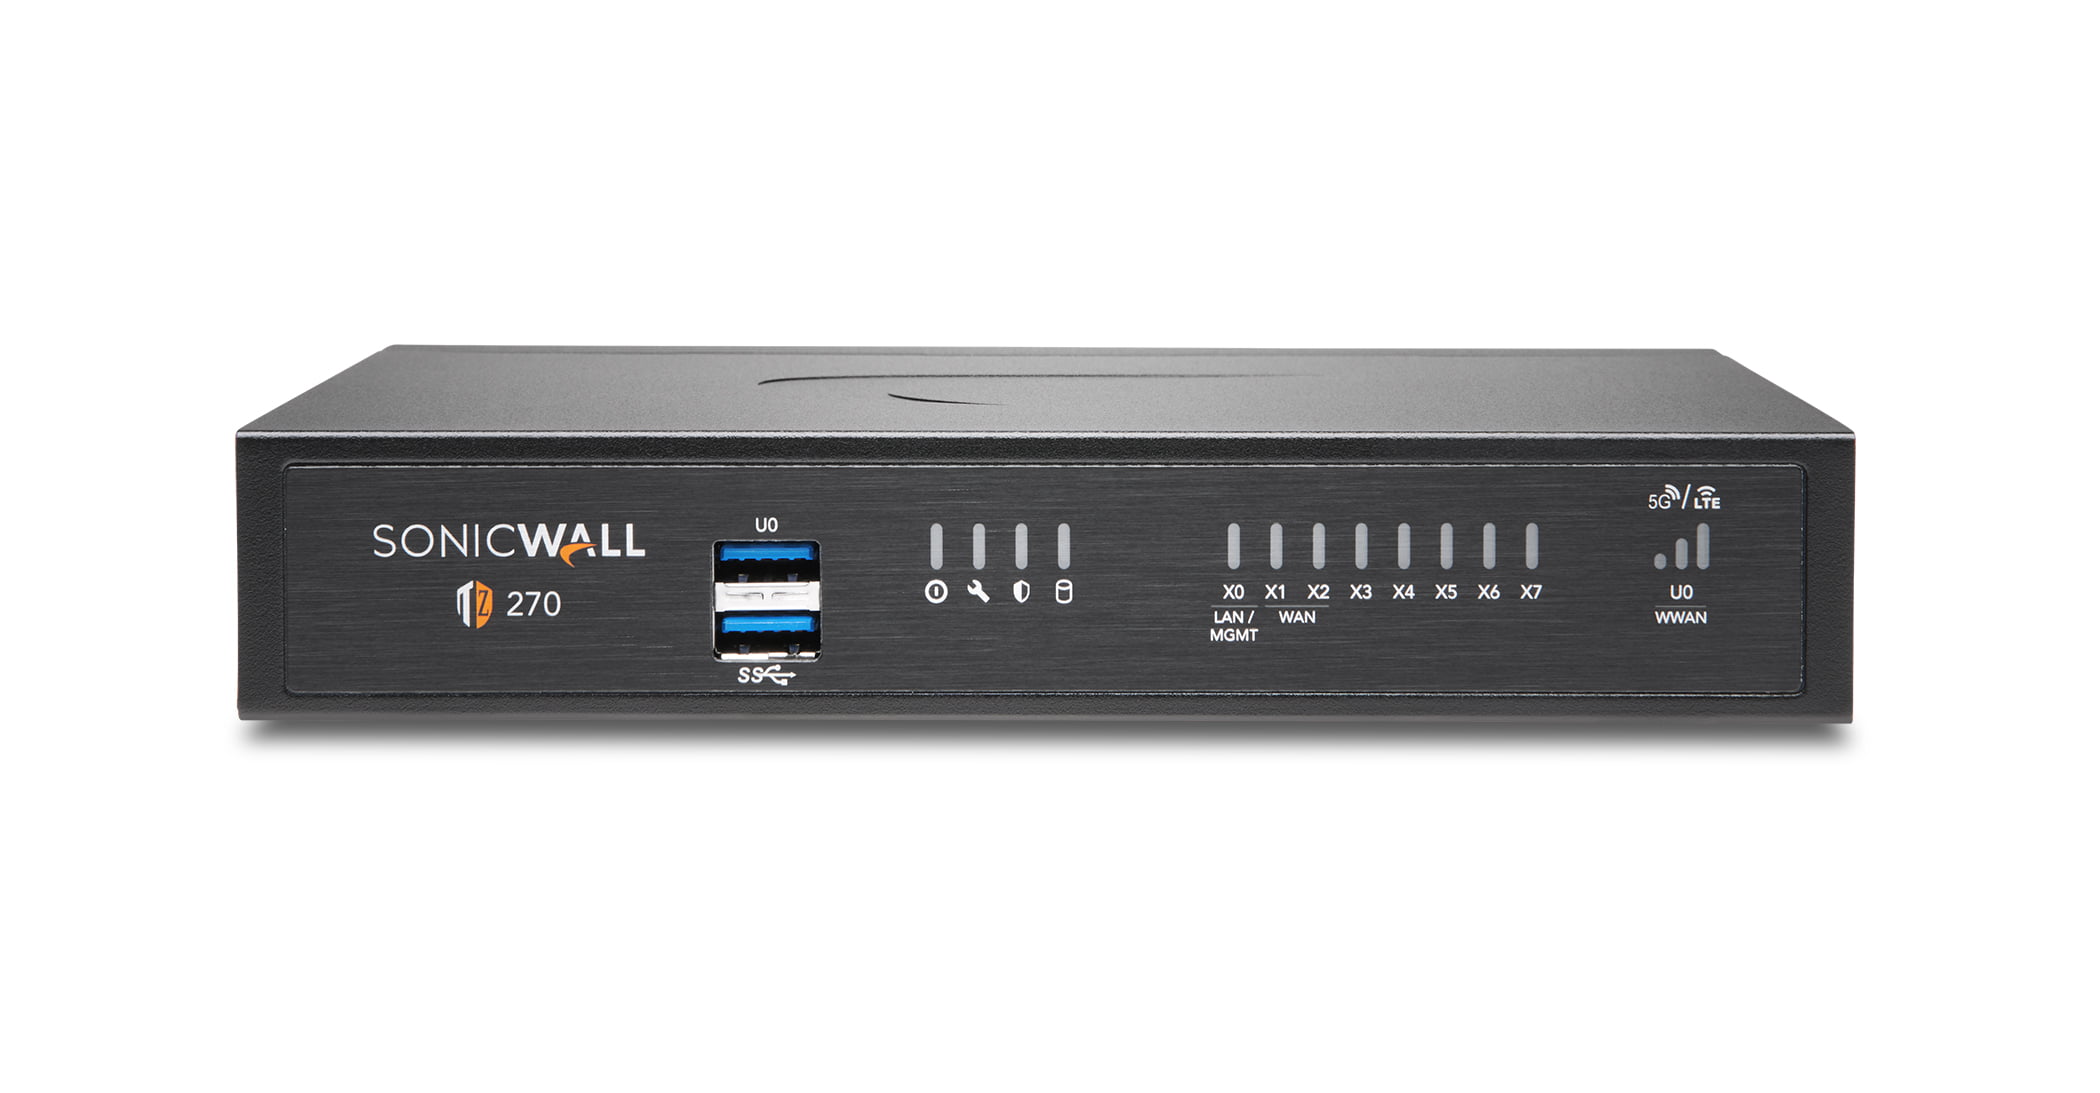 SONICWALL TZ270 + THREAT PROTECTION SERVICE SUITE (TPSS)